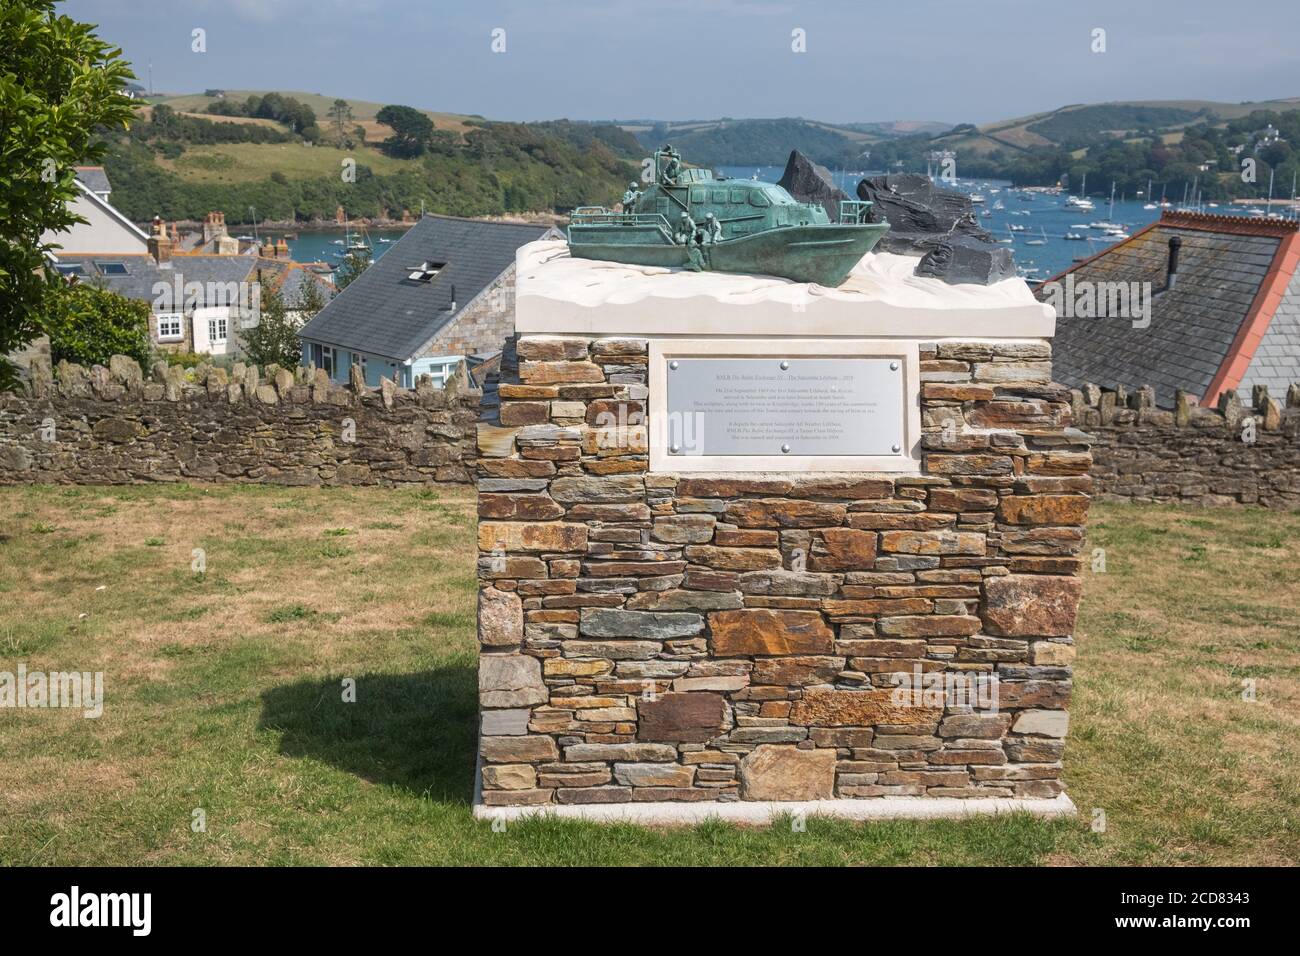 Sculpture of RNLB Baltic Exchange lll marking 150 years of lifeboats in Salcombe, Devon, UK Stock Photo